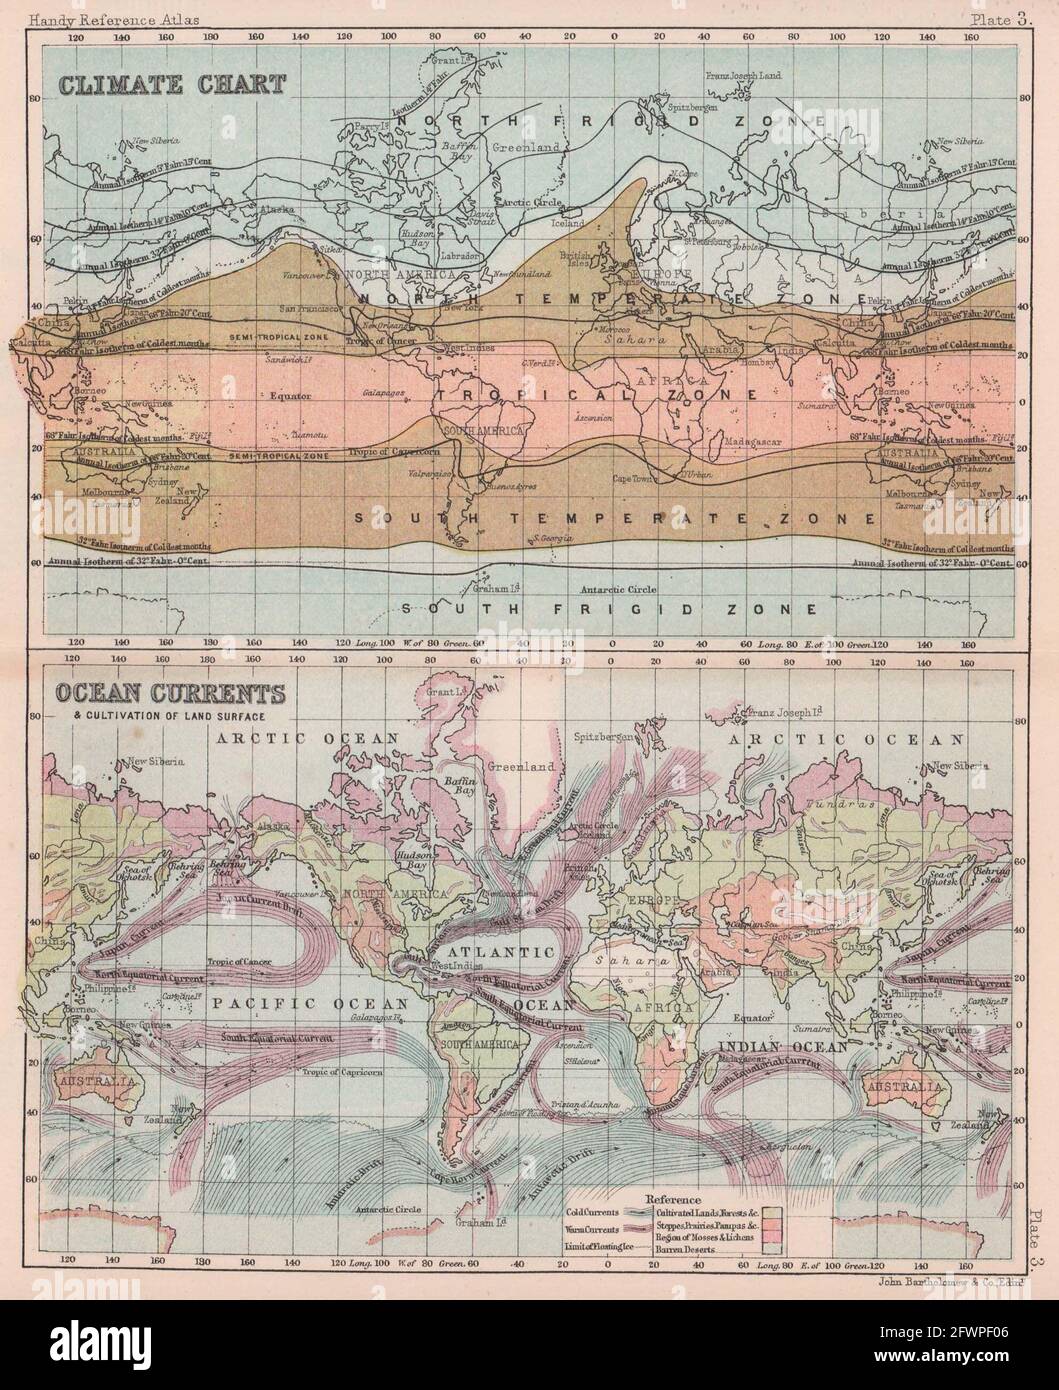 Climate Chart, Ocean Currents & Land cultivation. World. BARTHOLOMEW 1893 map Stock Photo